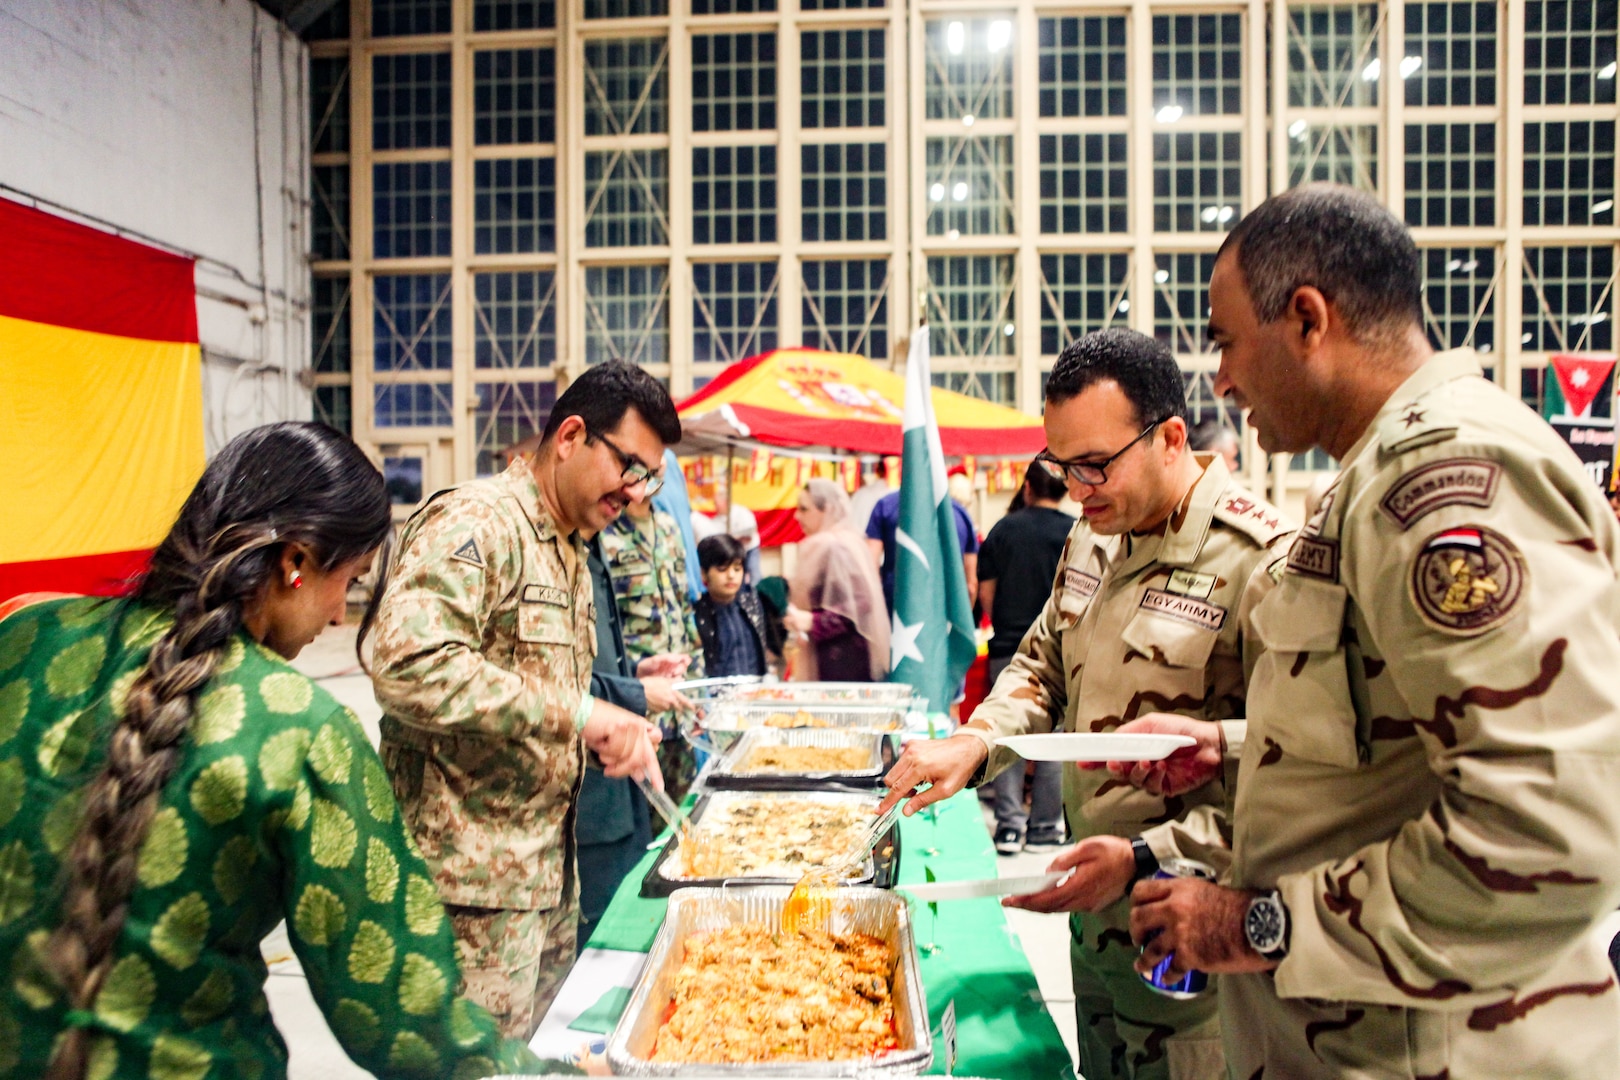 TAMPA, Fla. - Two Egyptian officers (right) sample Pakistani food during U.S. Central Command’s (CENTCOM) International Night, Dec. 07, 2023. International Night started in December 2004 as a winter holiday party for the Coalition members and families. This year, members of CENTCOM’s coalition countries displayed native customs and offered a taste of their traditional cuisines to guests. (U.S. Central Command Public Affairs photo by Maged Benjamin-Elias)